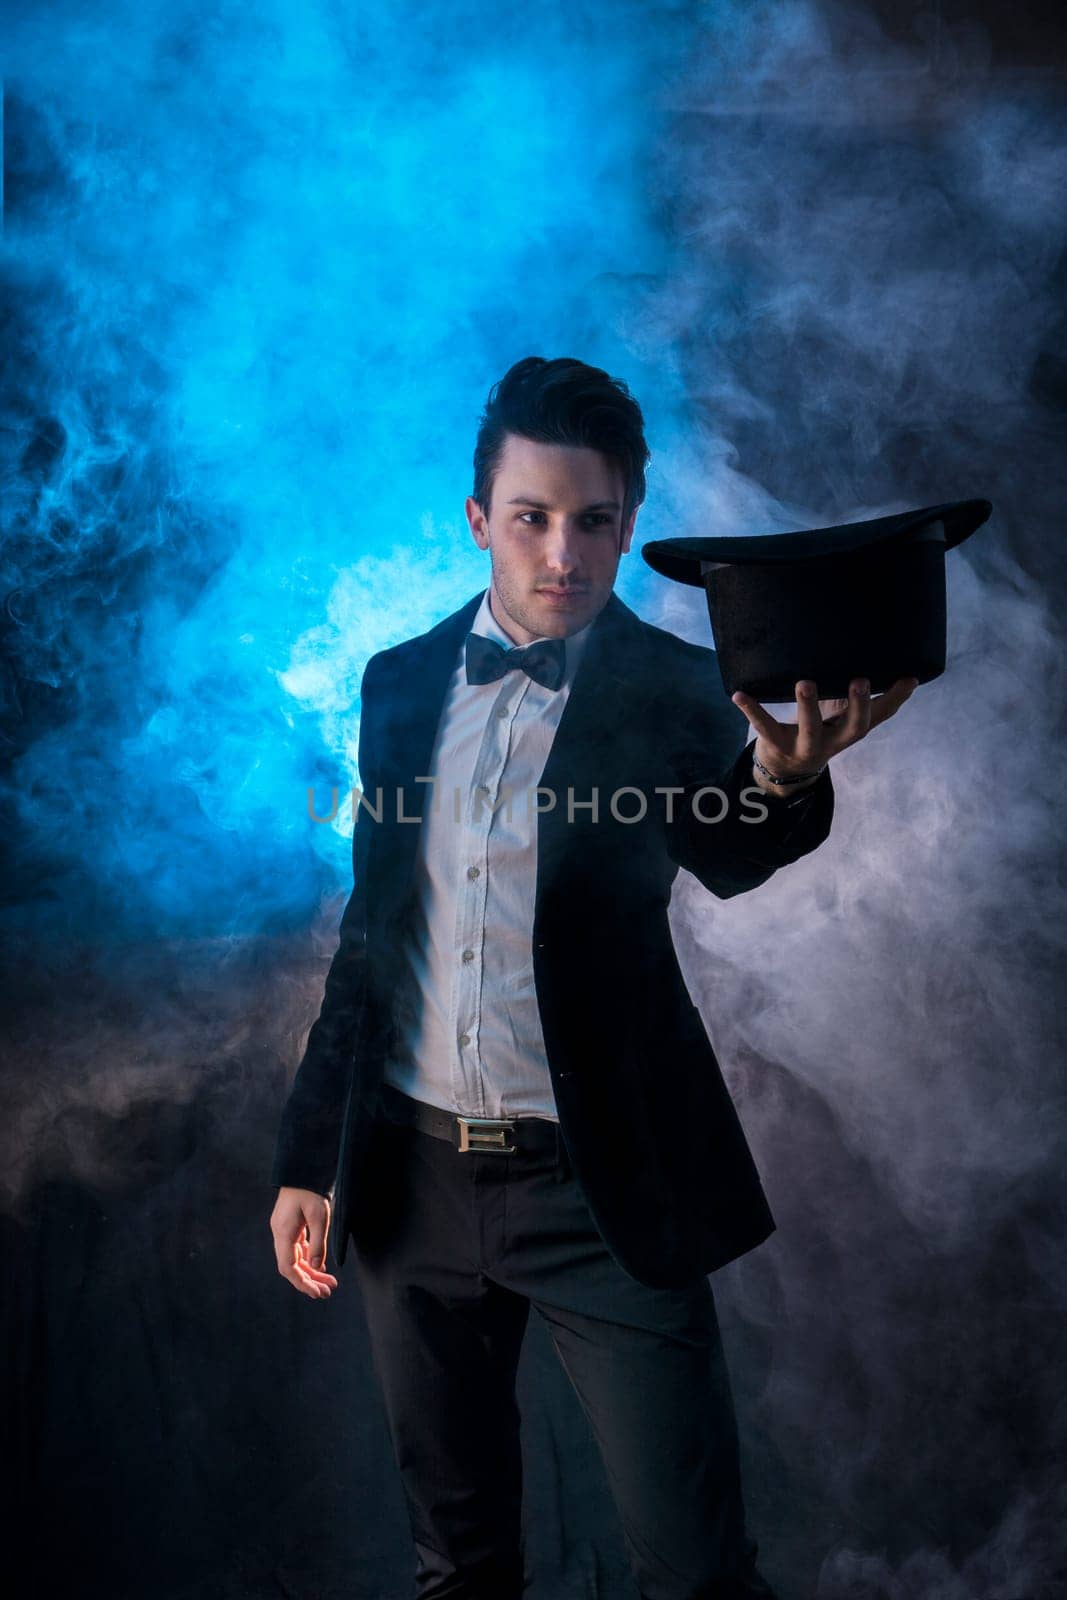 Photo of a stylish man in a tuxedo holding a black hat by artofphoto